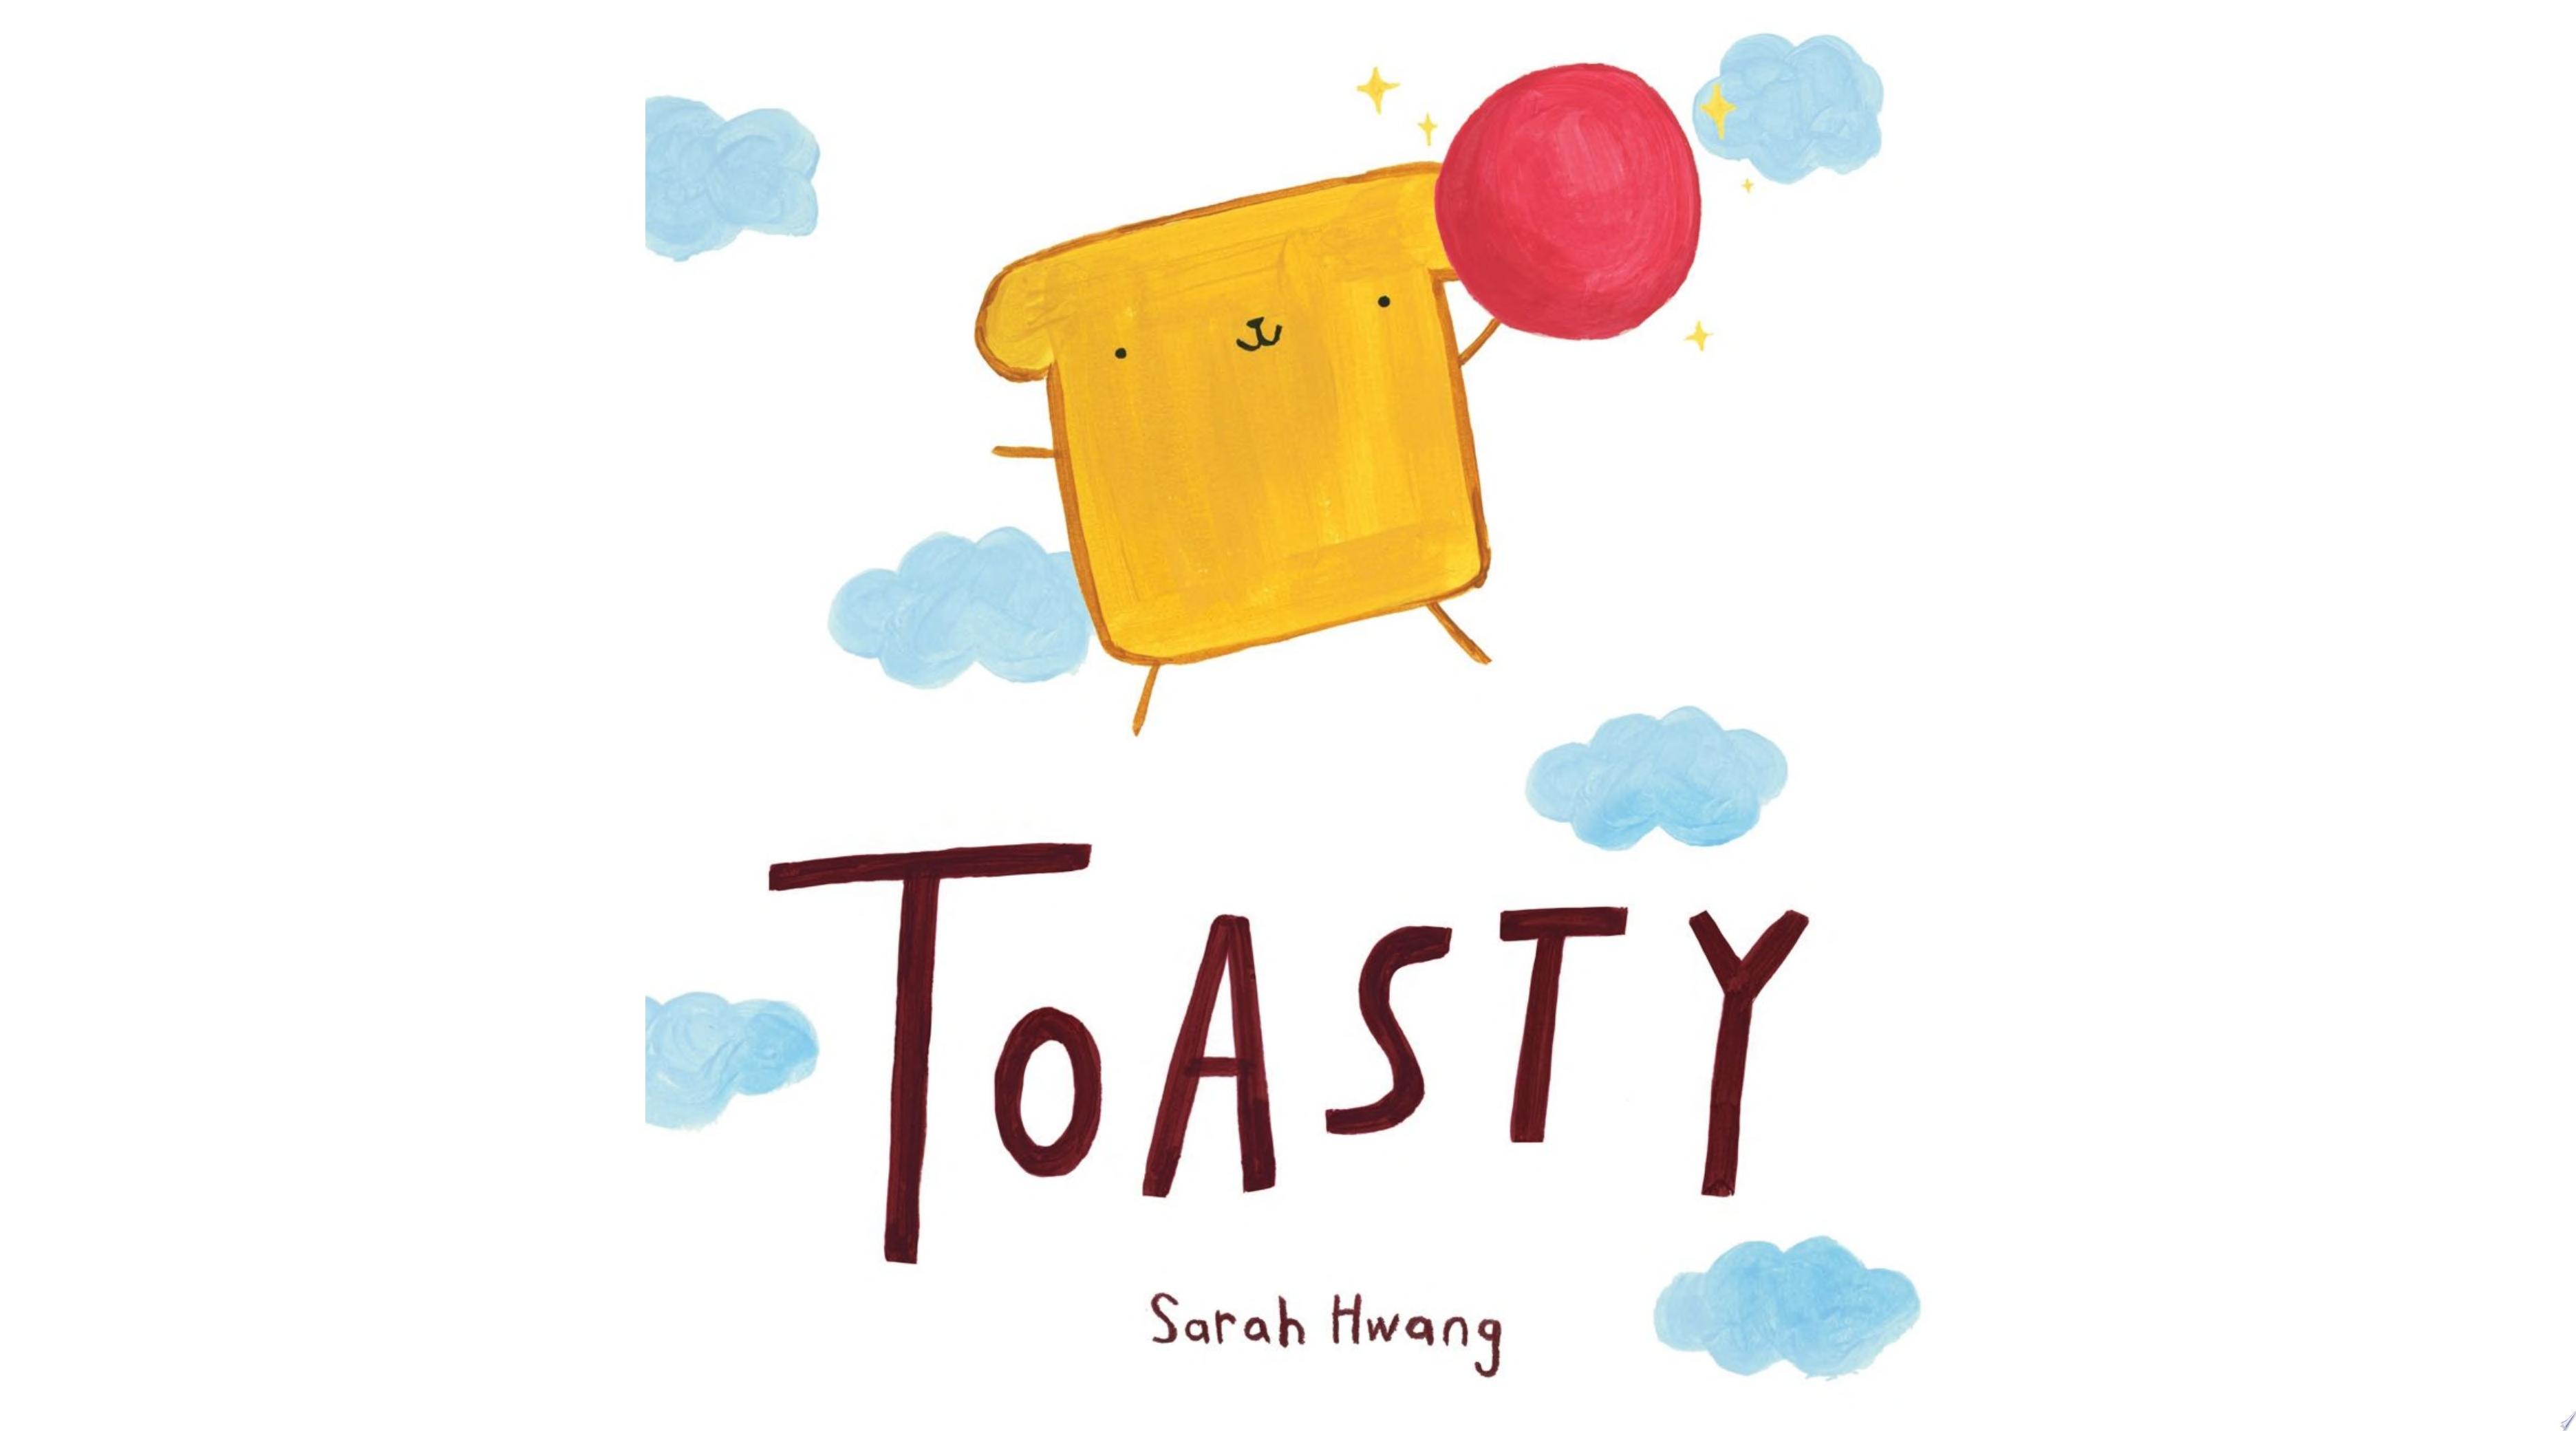 Image for "Toasty"